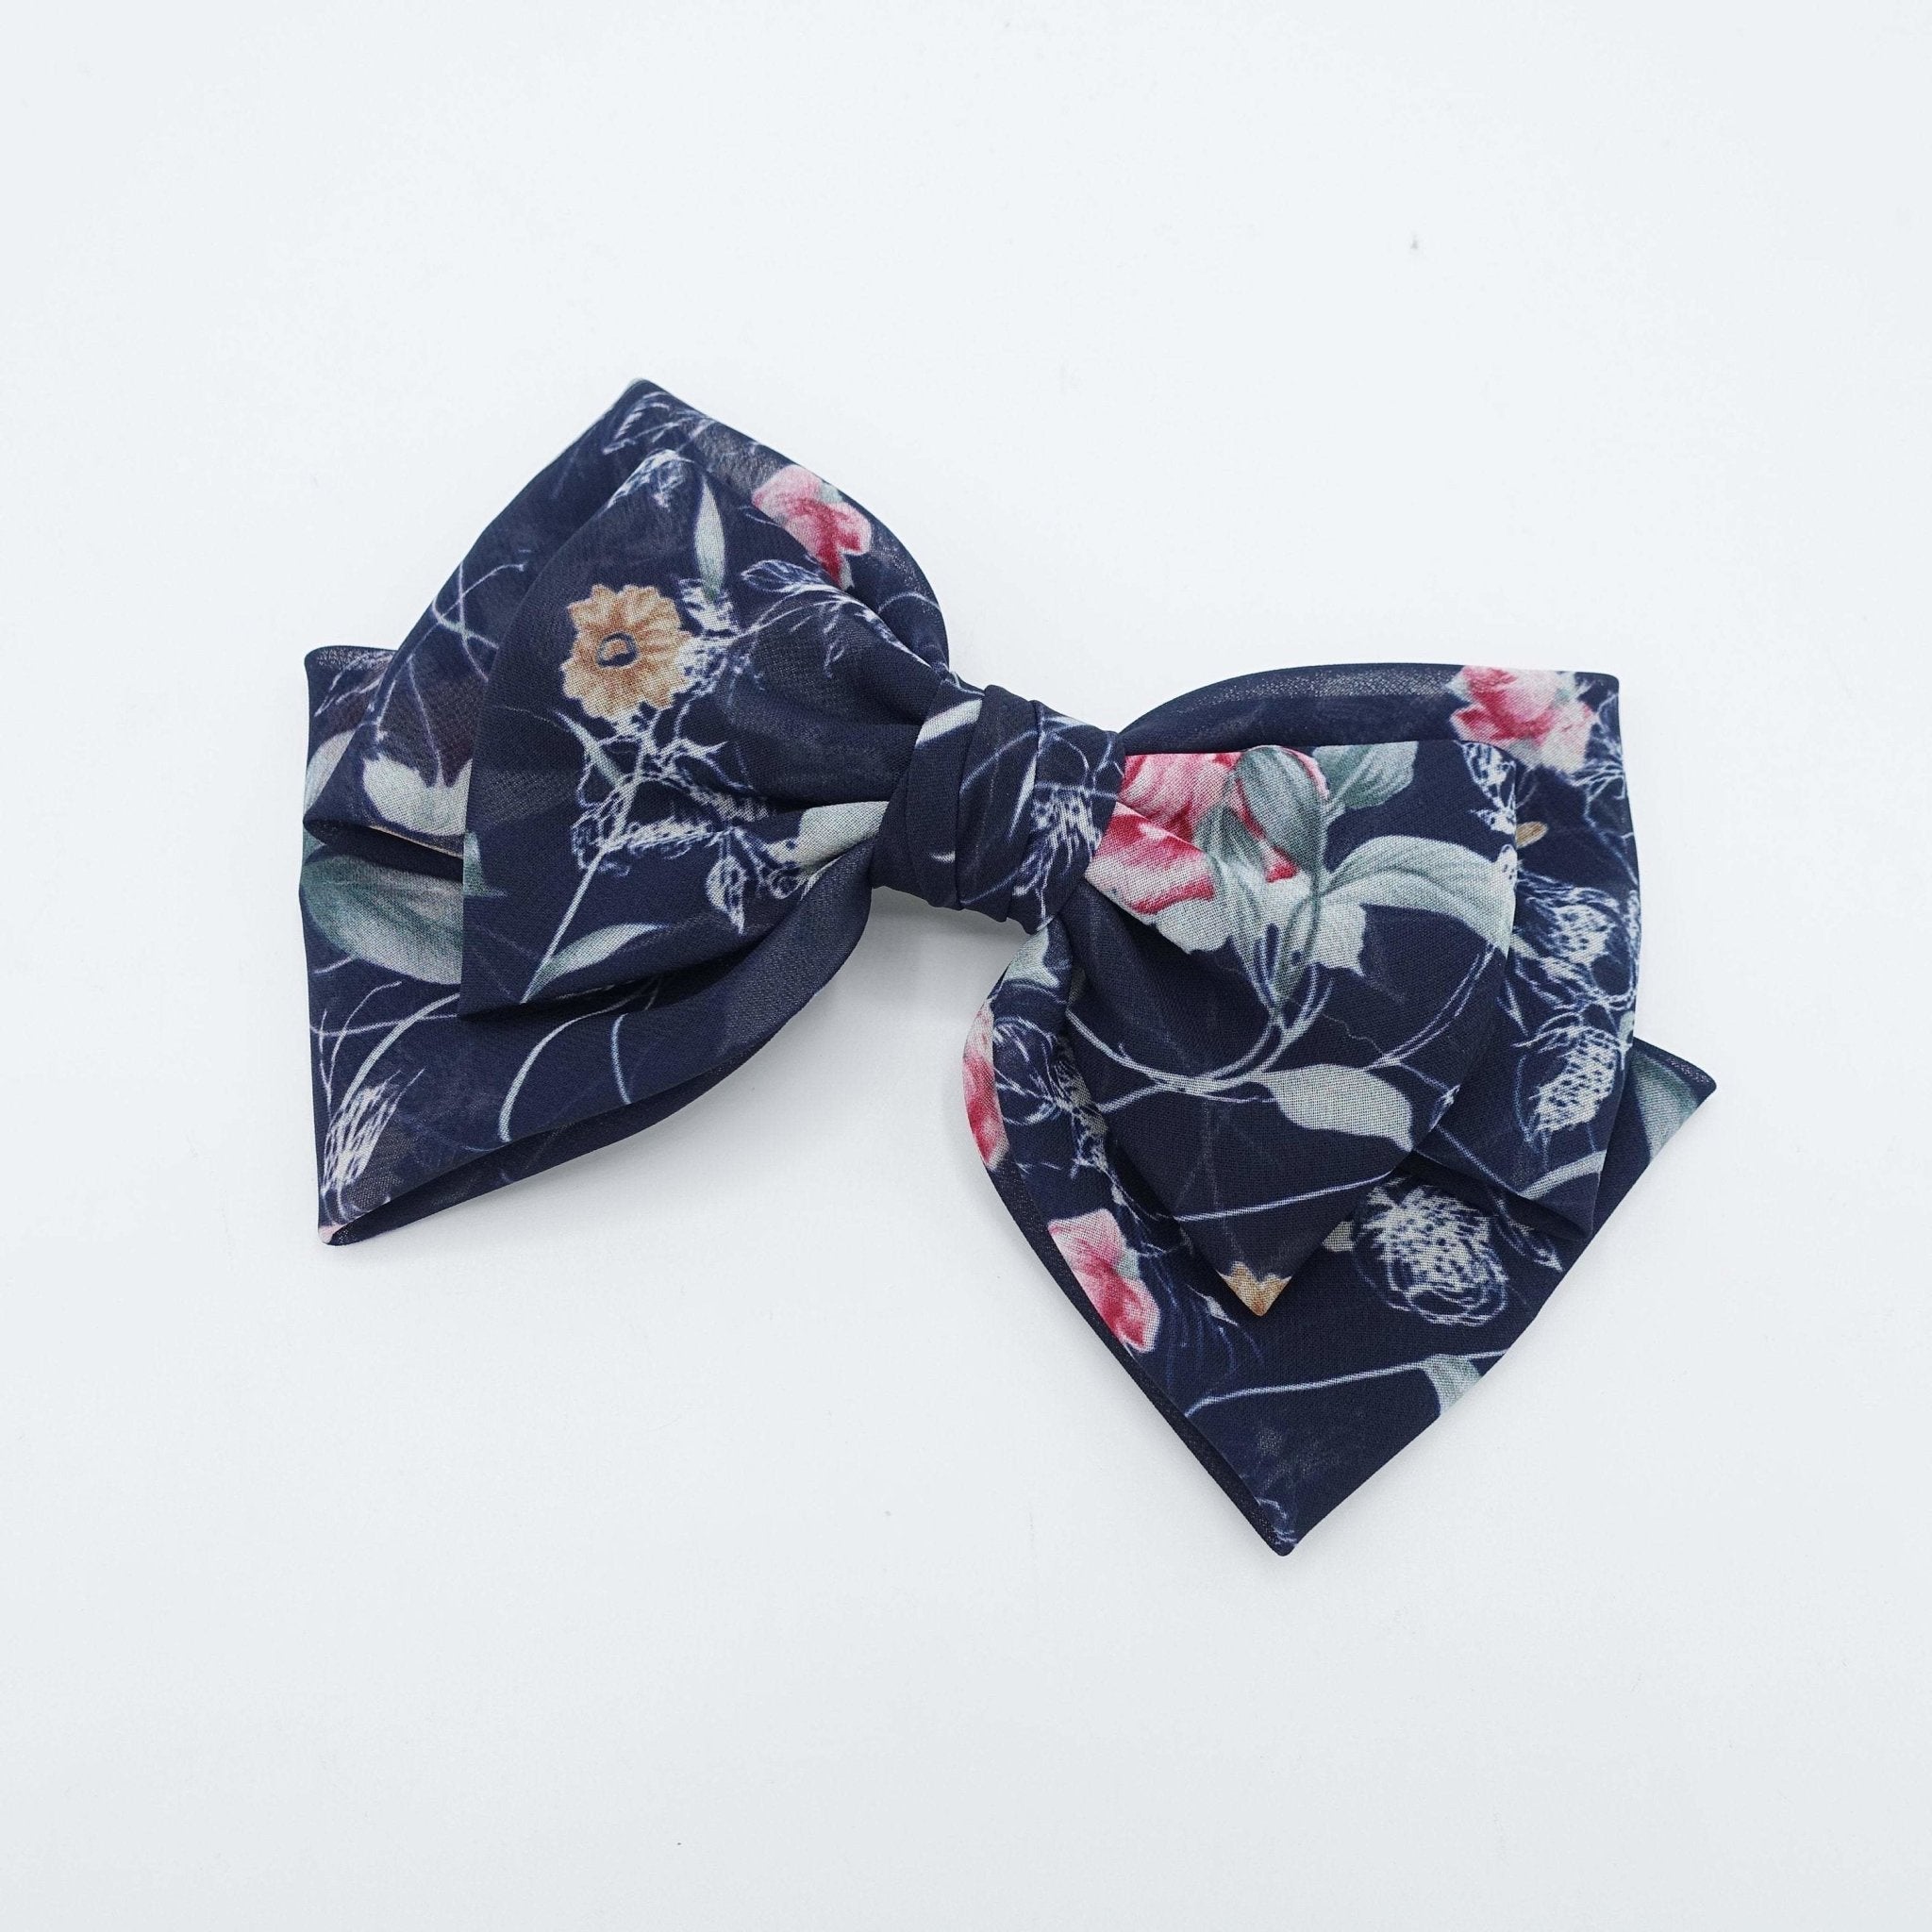 VeryShine chiffon layered hair bow floral plant print hair accessory for women